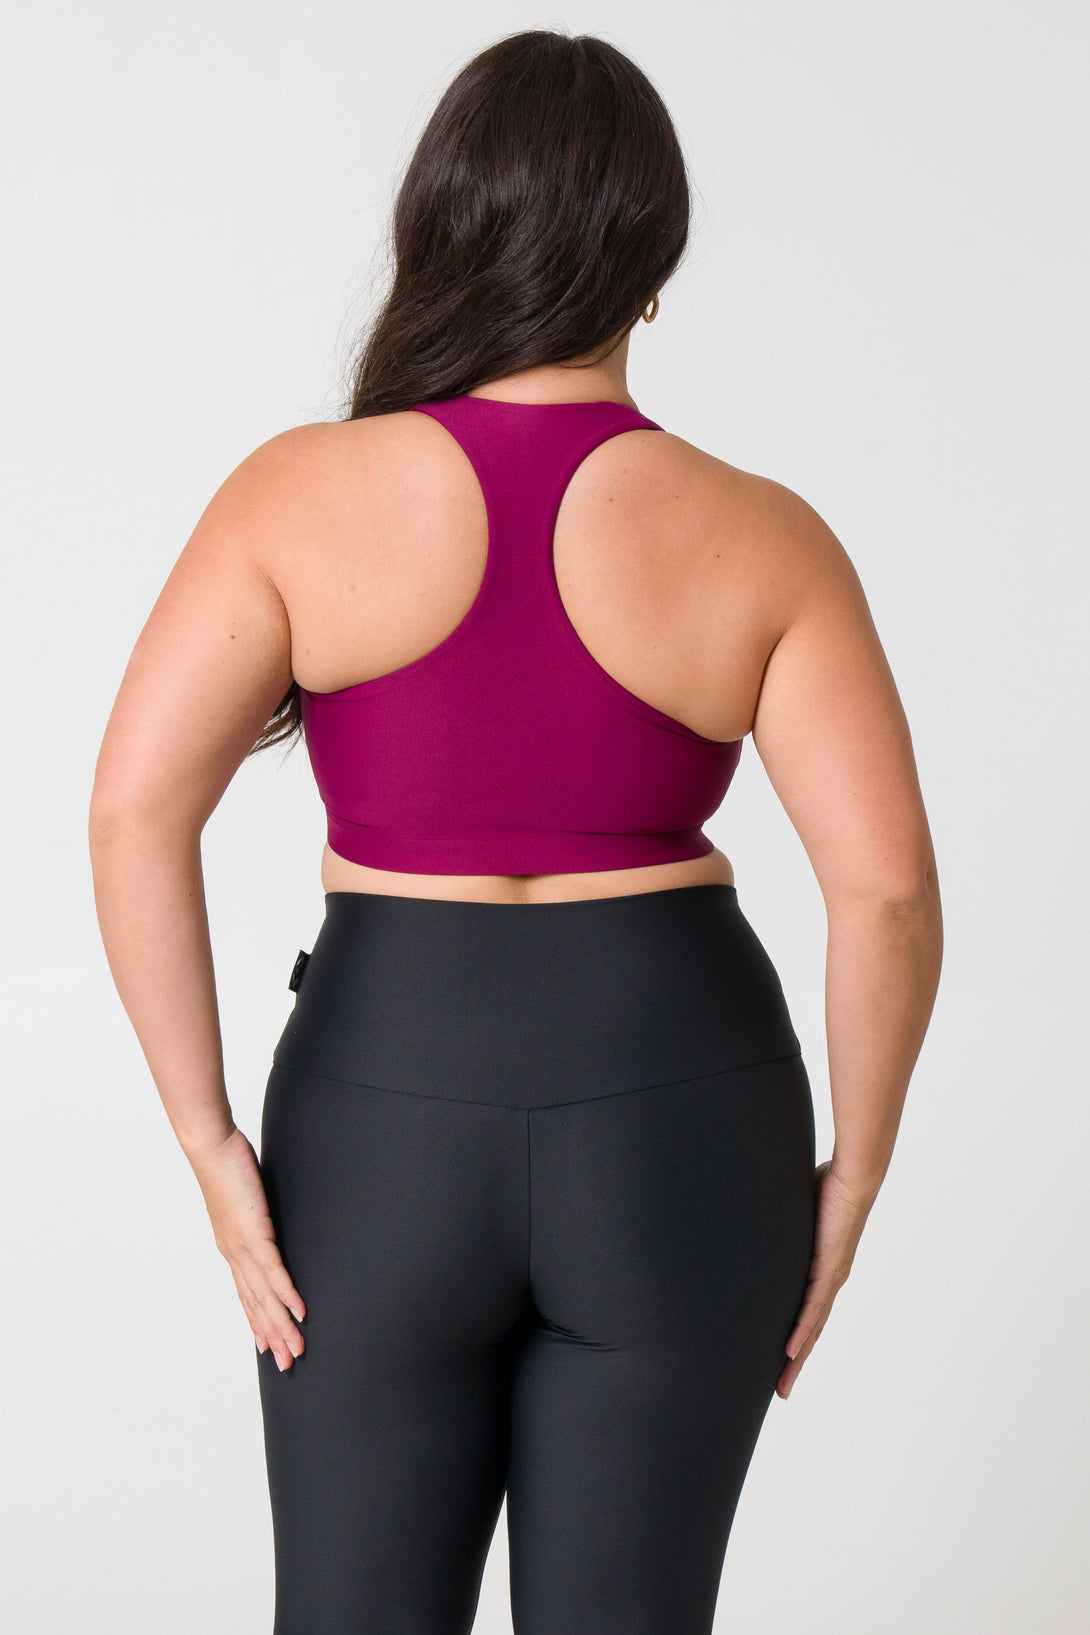 ExoticAthletica Women's Activewear Berry Performance Deep V Crop - Stylish and supportive activewear for women, featuring a deep V neckline and vibrant berry color. Perfect for workouts or casual wear.